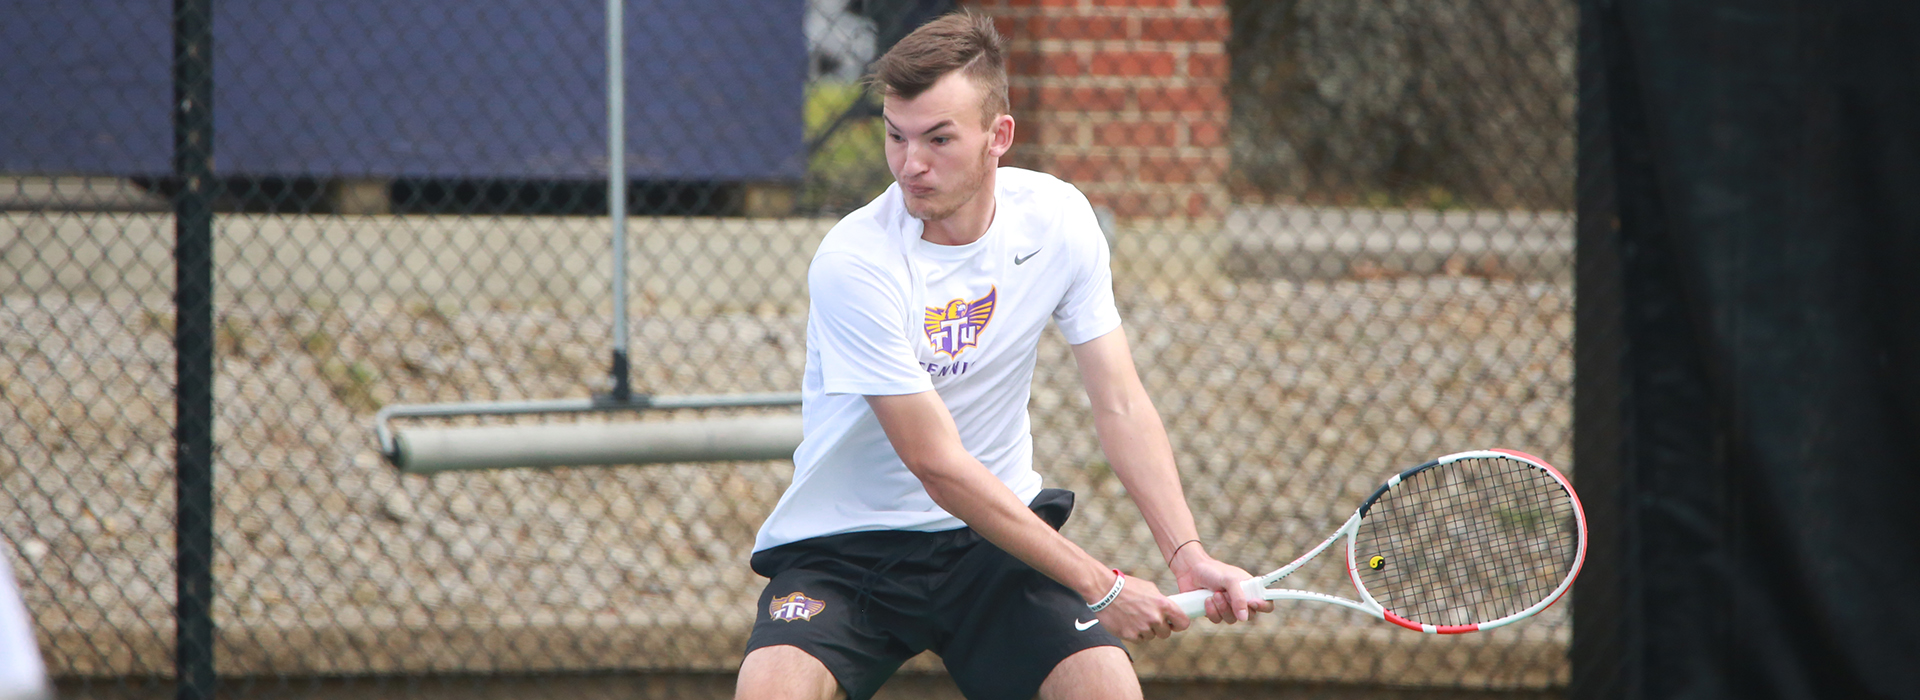 Holis collects second OVC Male Tennis Athlete of the Week honors of the year